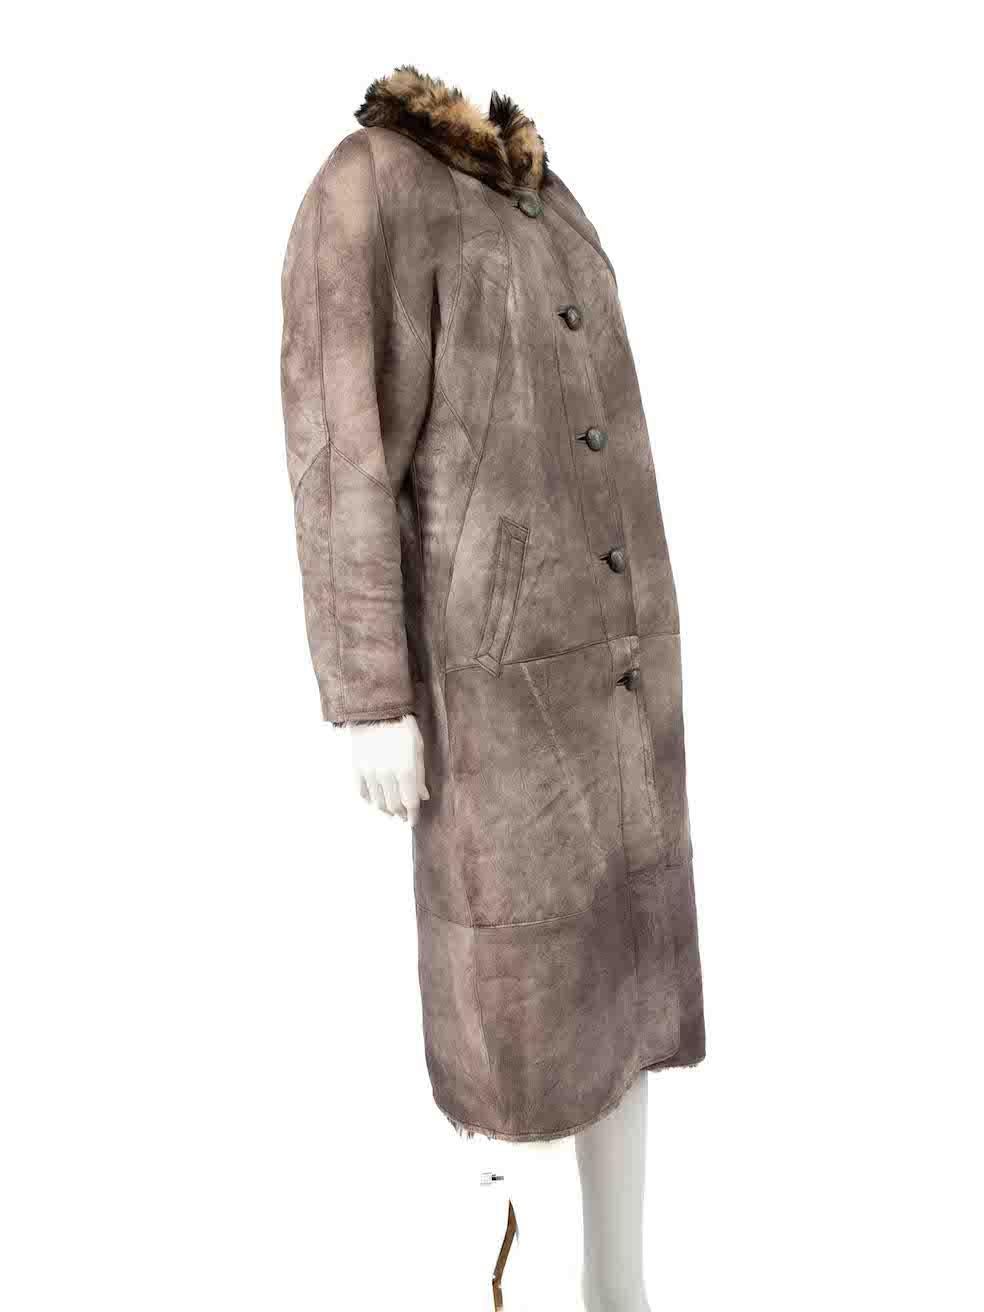 CONDITION is Very good. Minimal wear to coat is evident. Minimal discolouration mark to both cuffs, centre front and right side. The size and composition label are missing on this used Testyler designer resale item.
 
 
 
 Details
 
 
 Grey
 
